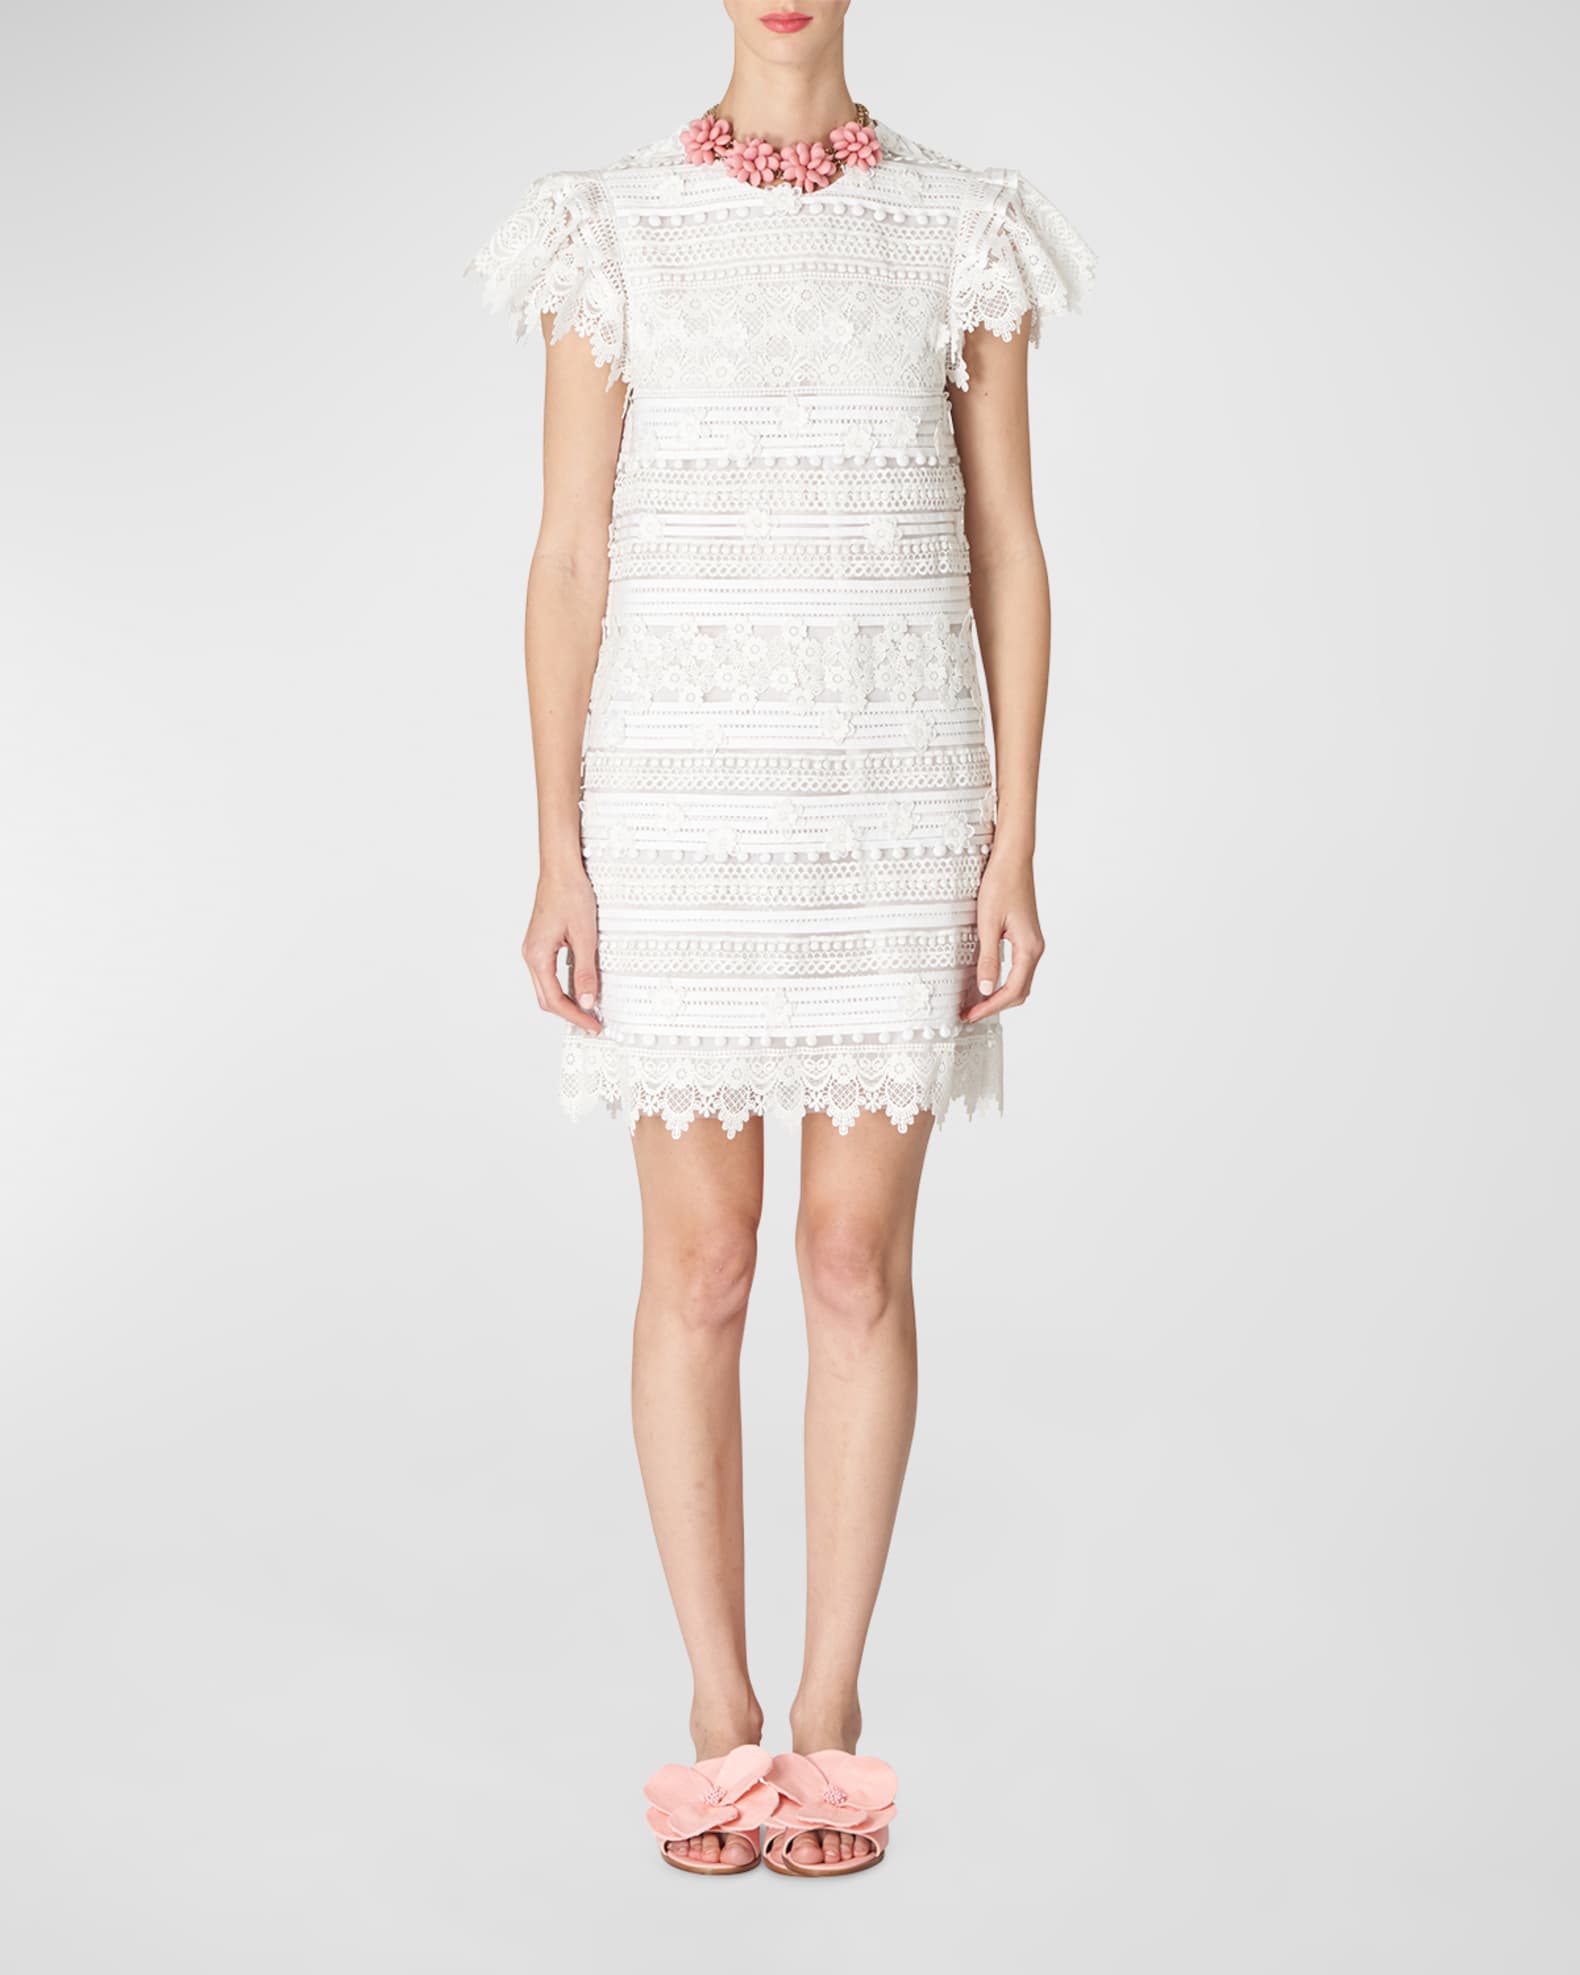 All My Adoration White Lace Halter Shift Dress